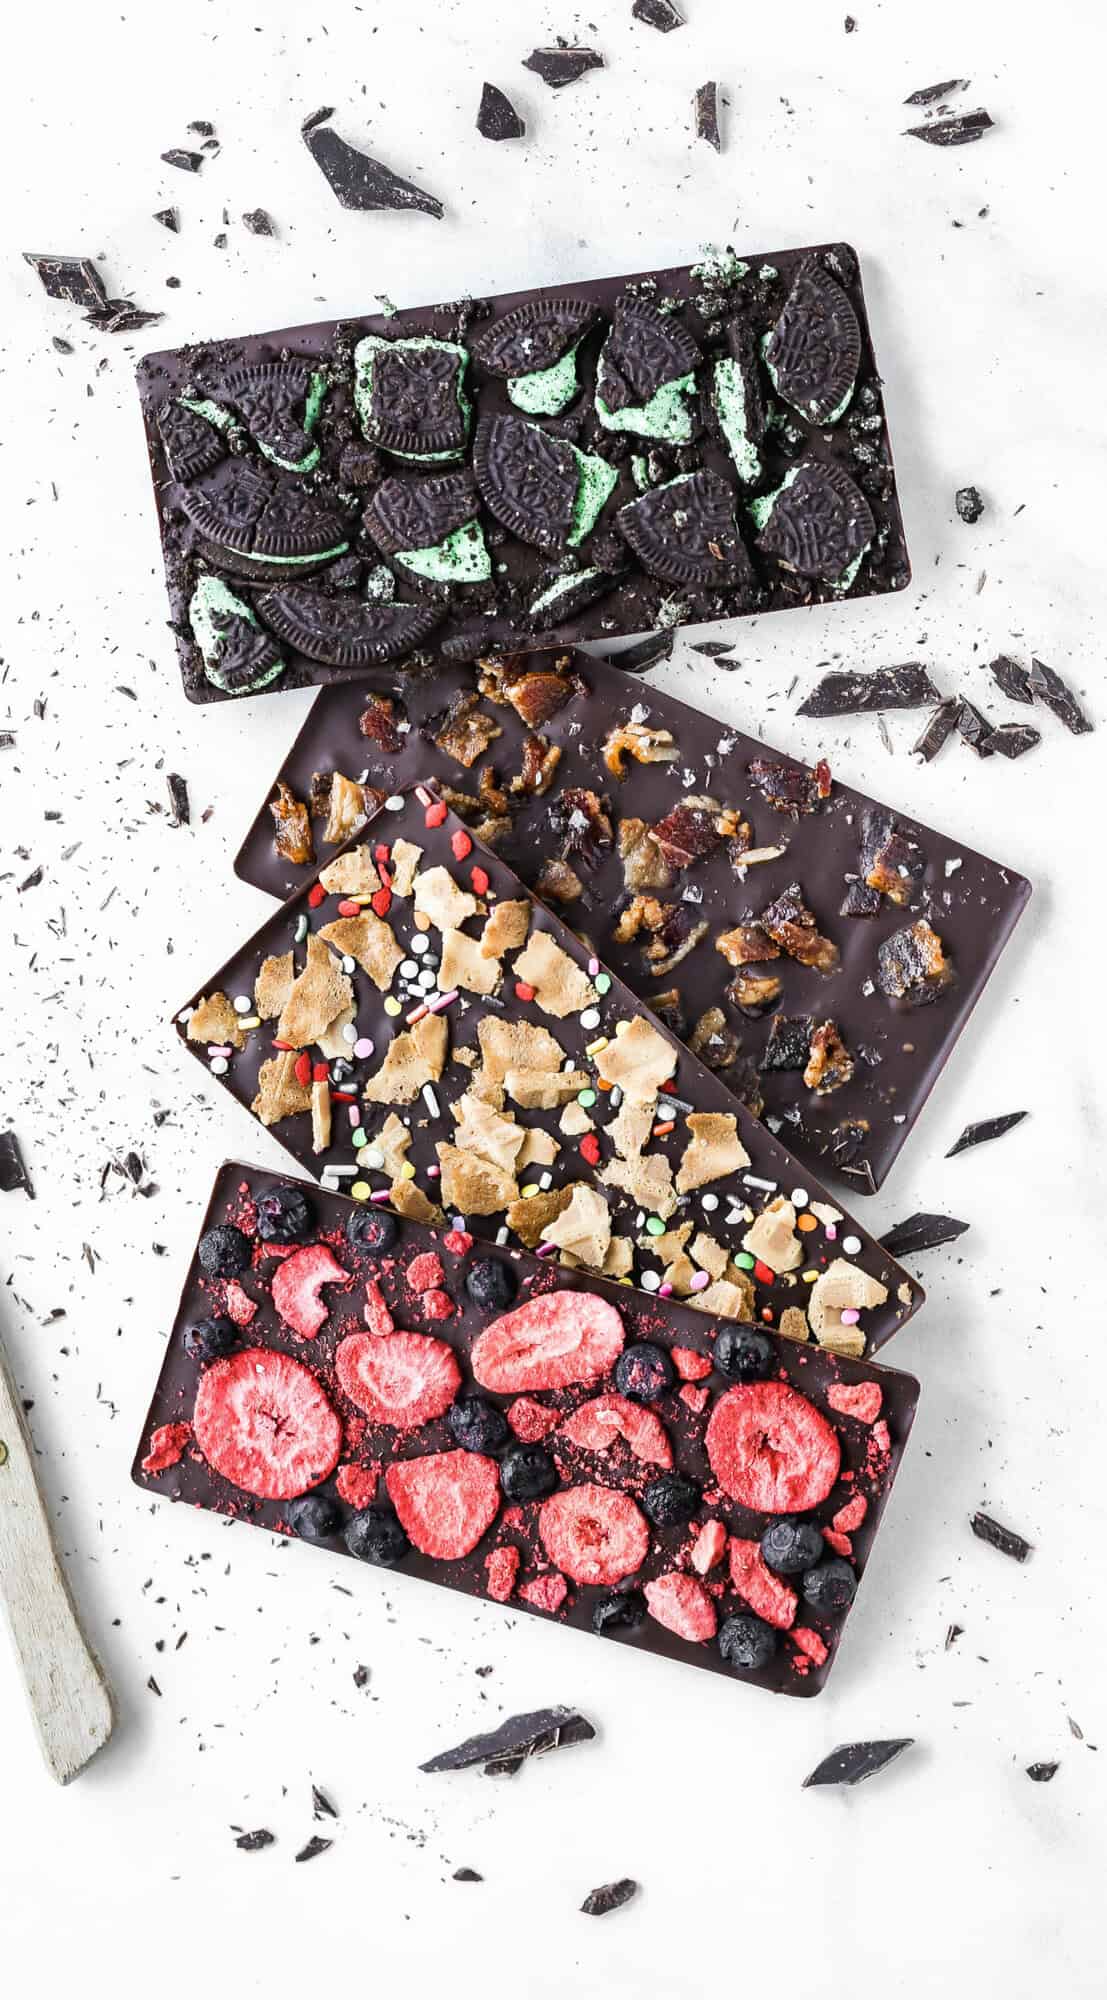 Your Complete Guide to Vegan Chocolate Bars